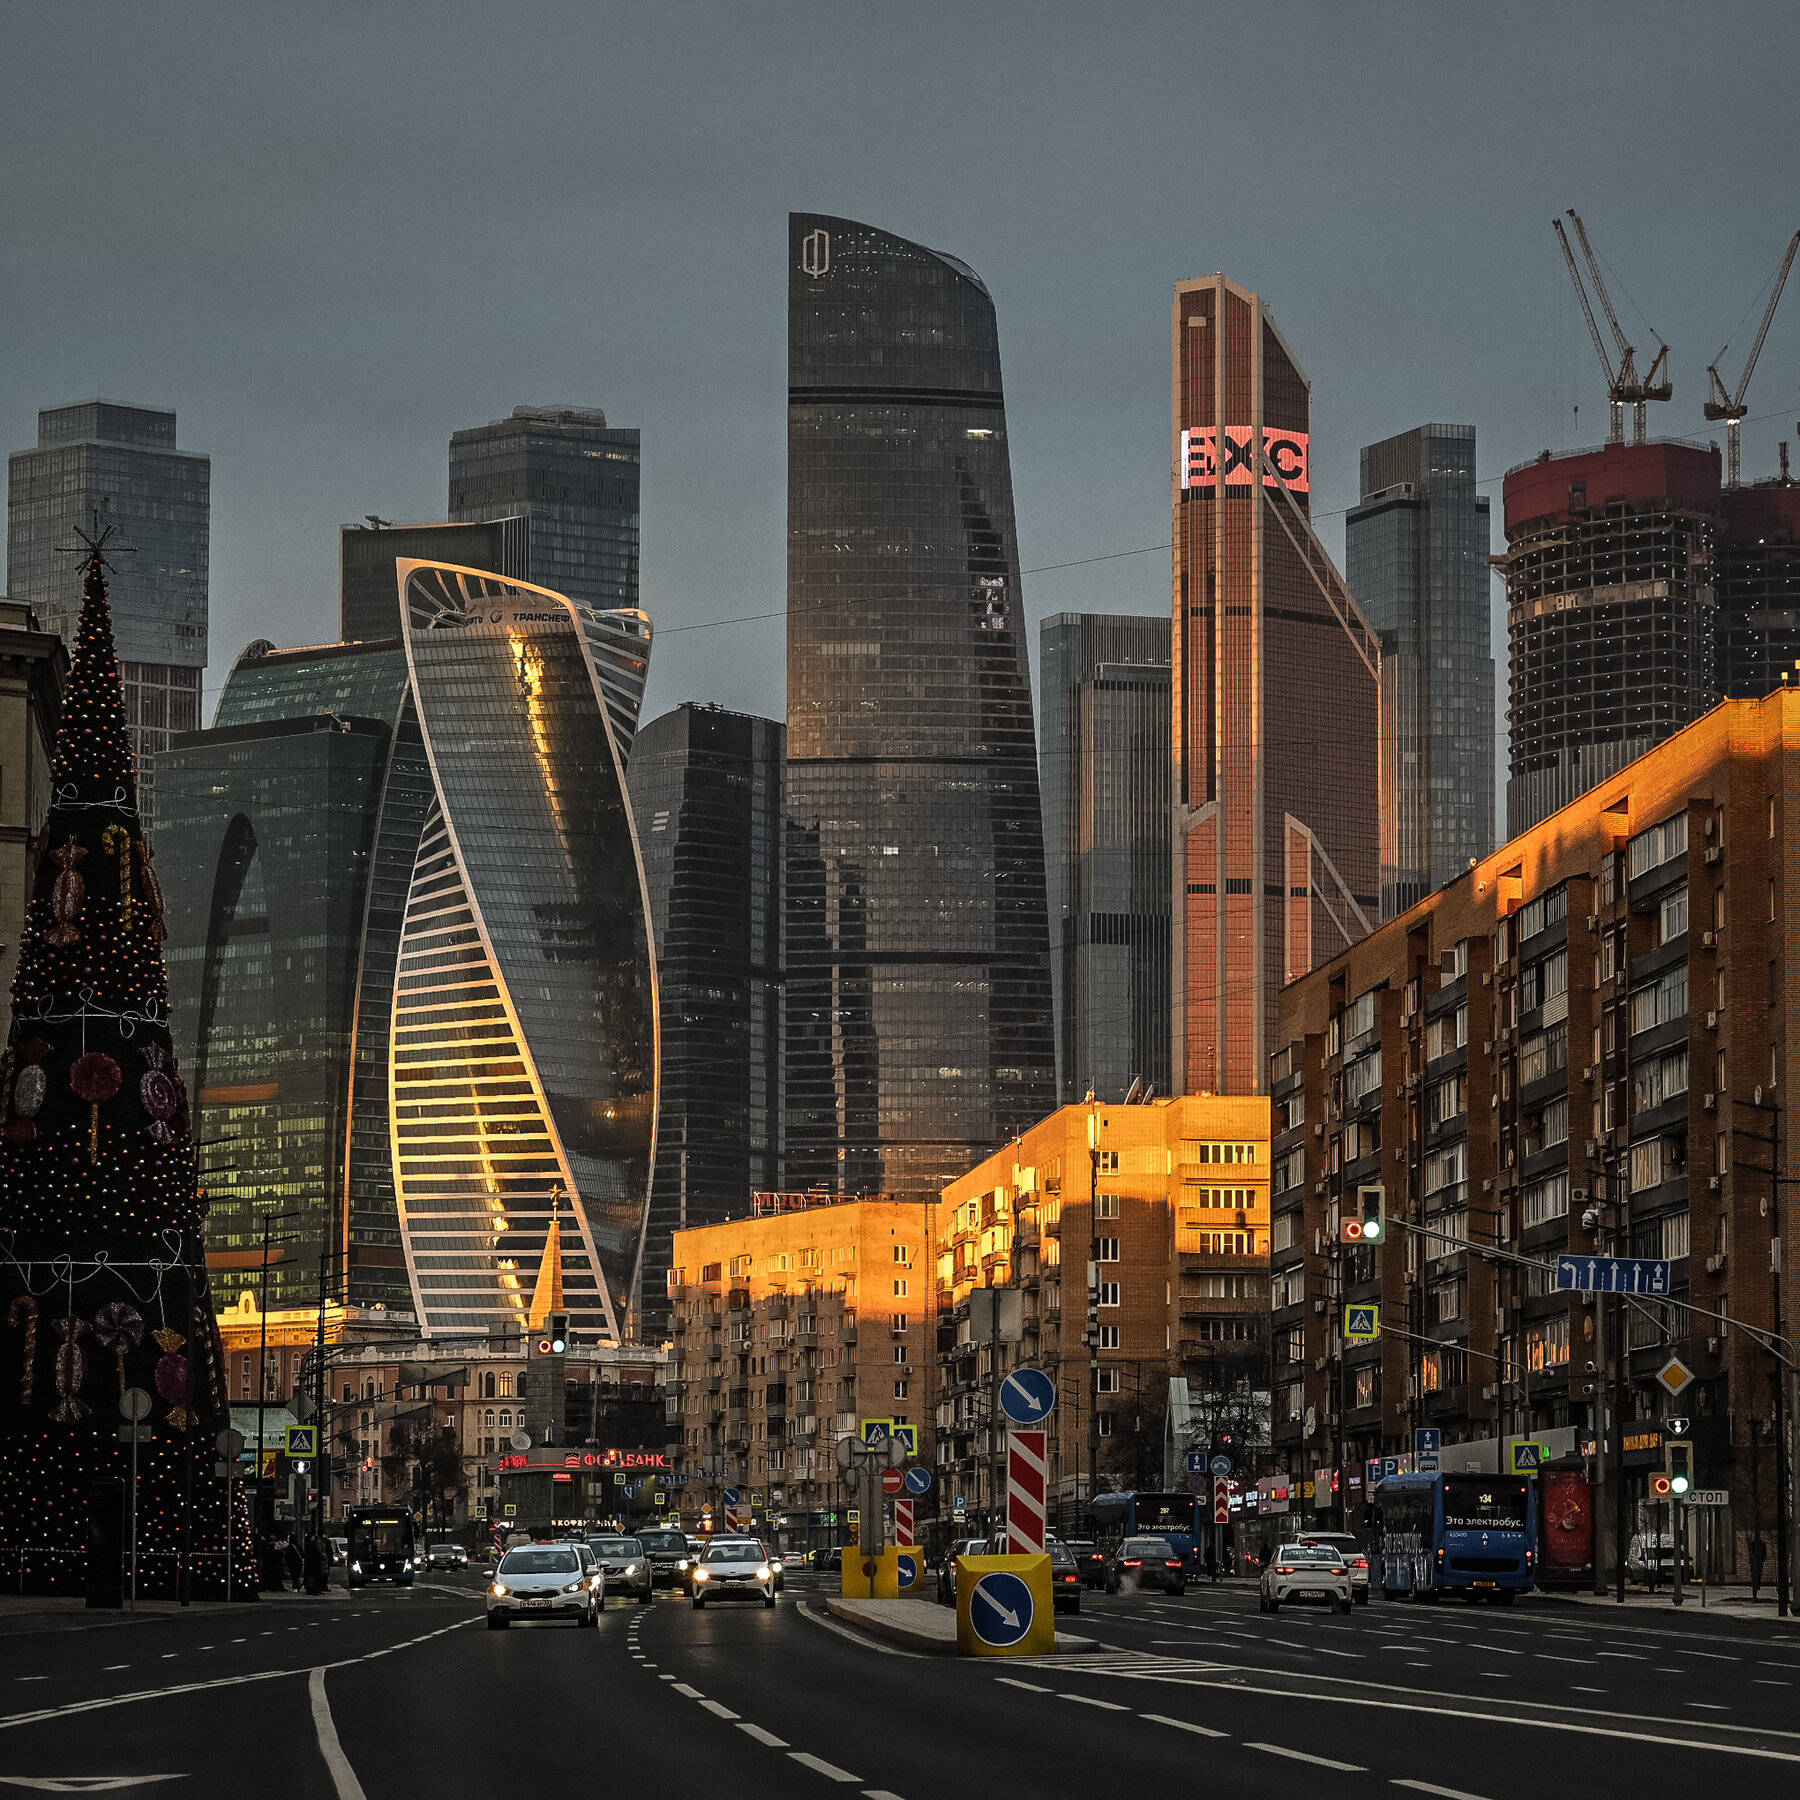 Moscow Russia Skyscrapers Street View Wallpaper